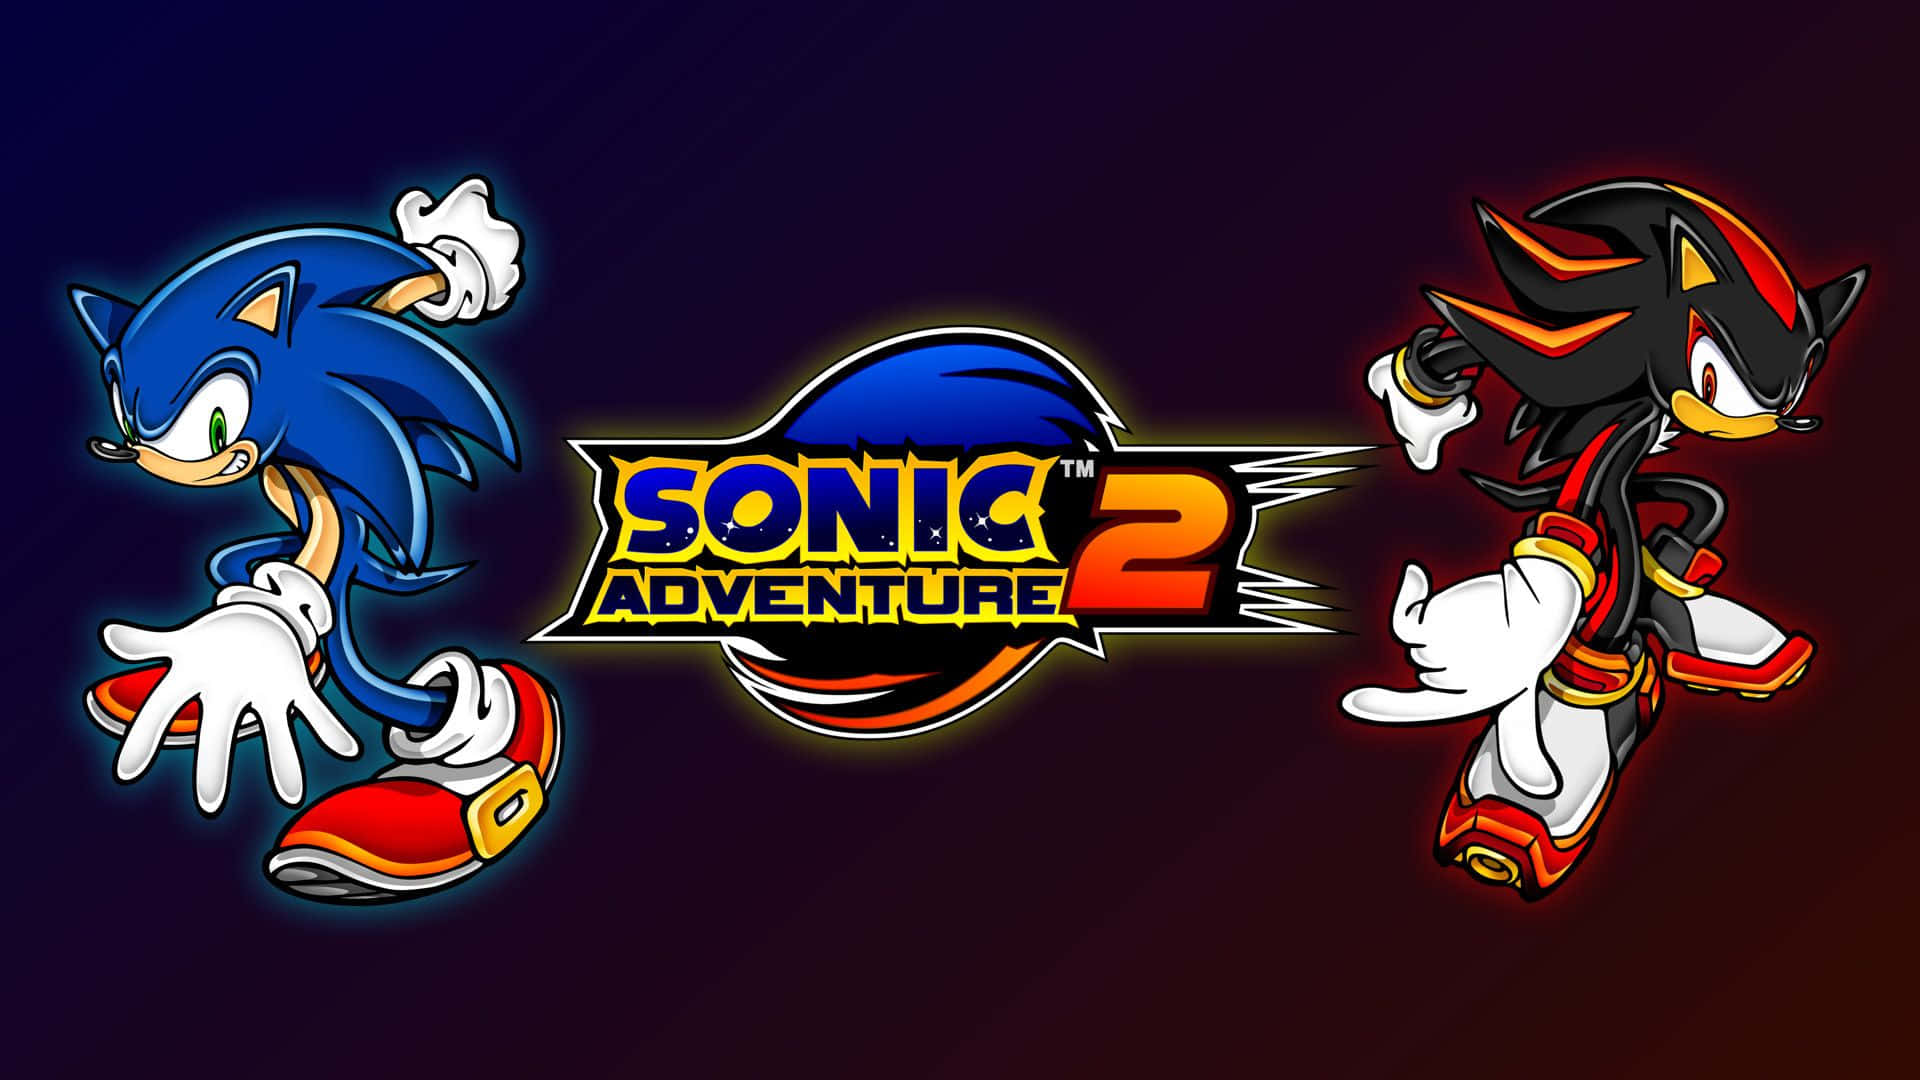 Sonic Adventure HD - Sonic the Hedgehog in Action Wallpaper